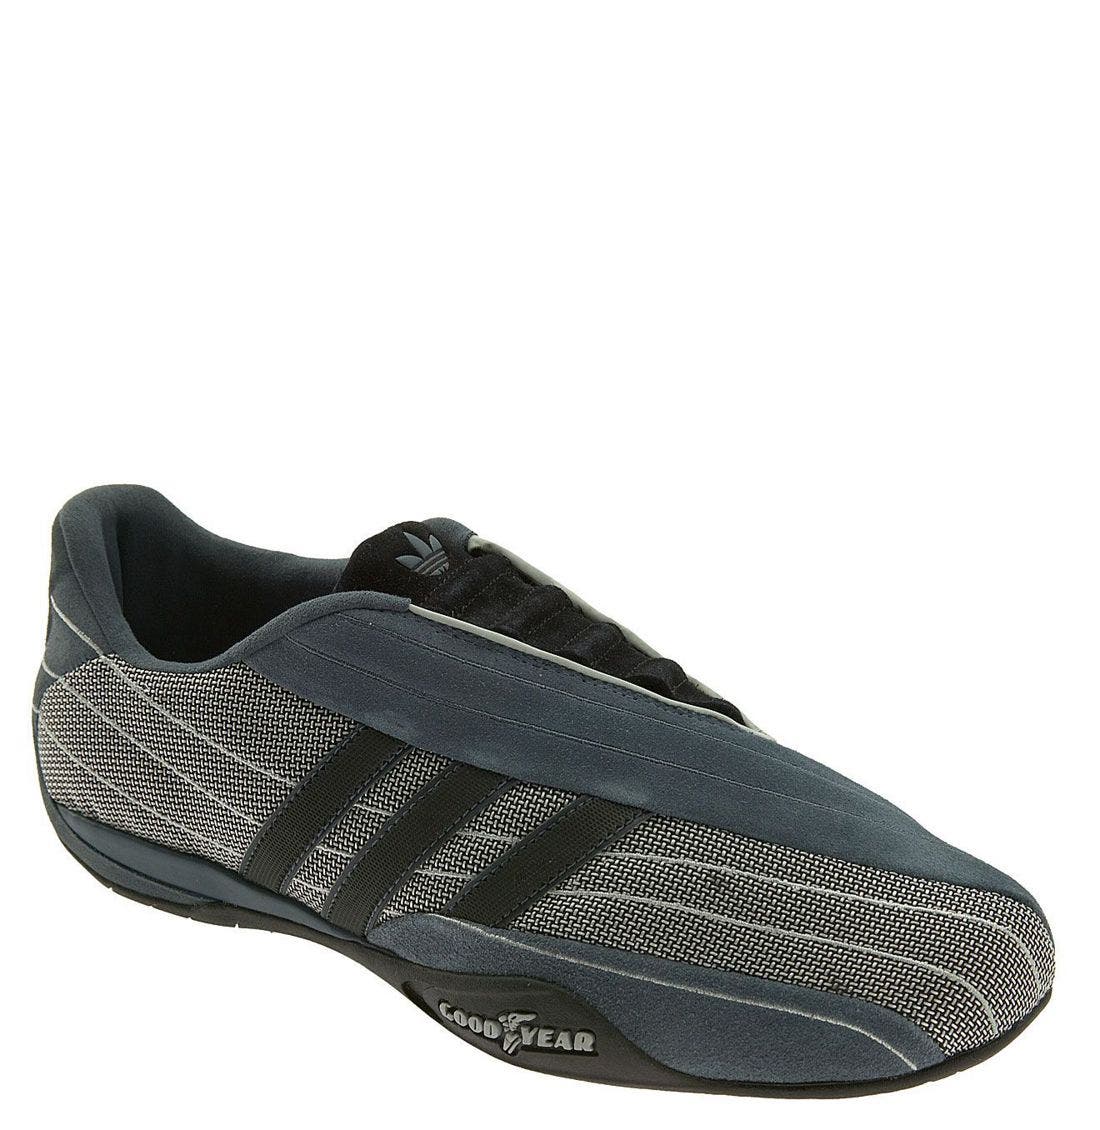 adidas goodyear racer shoes